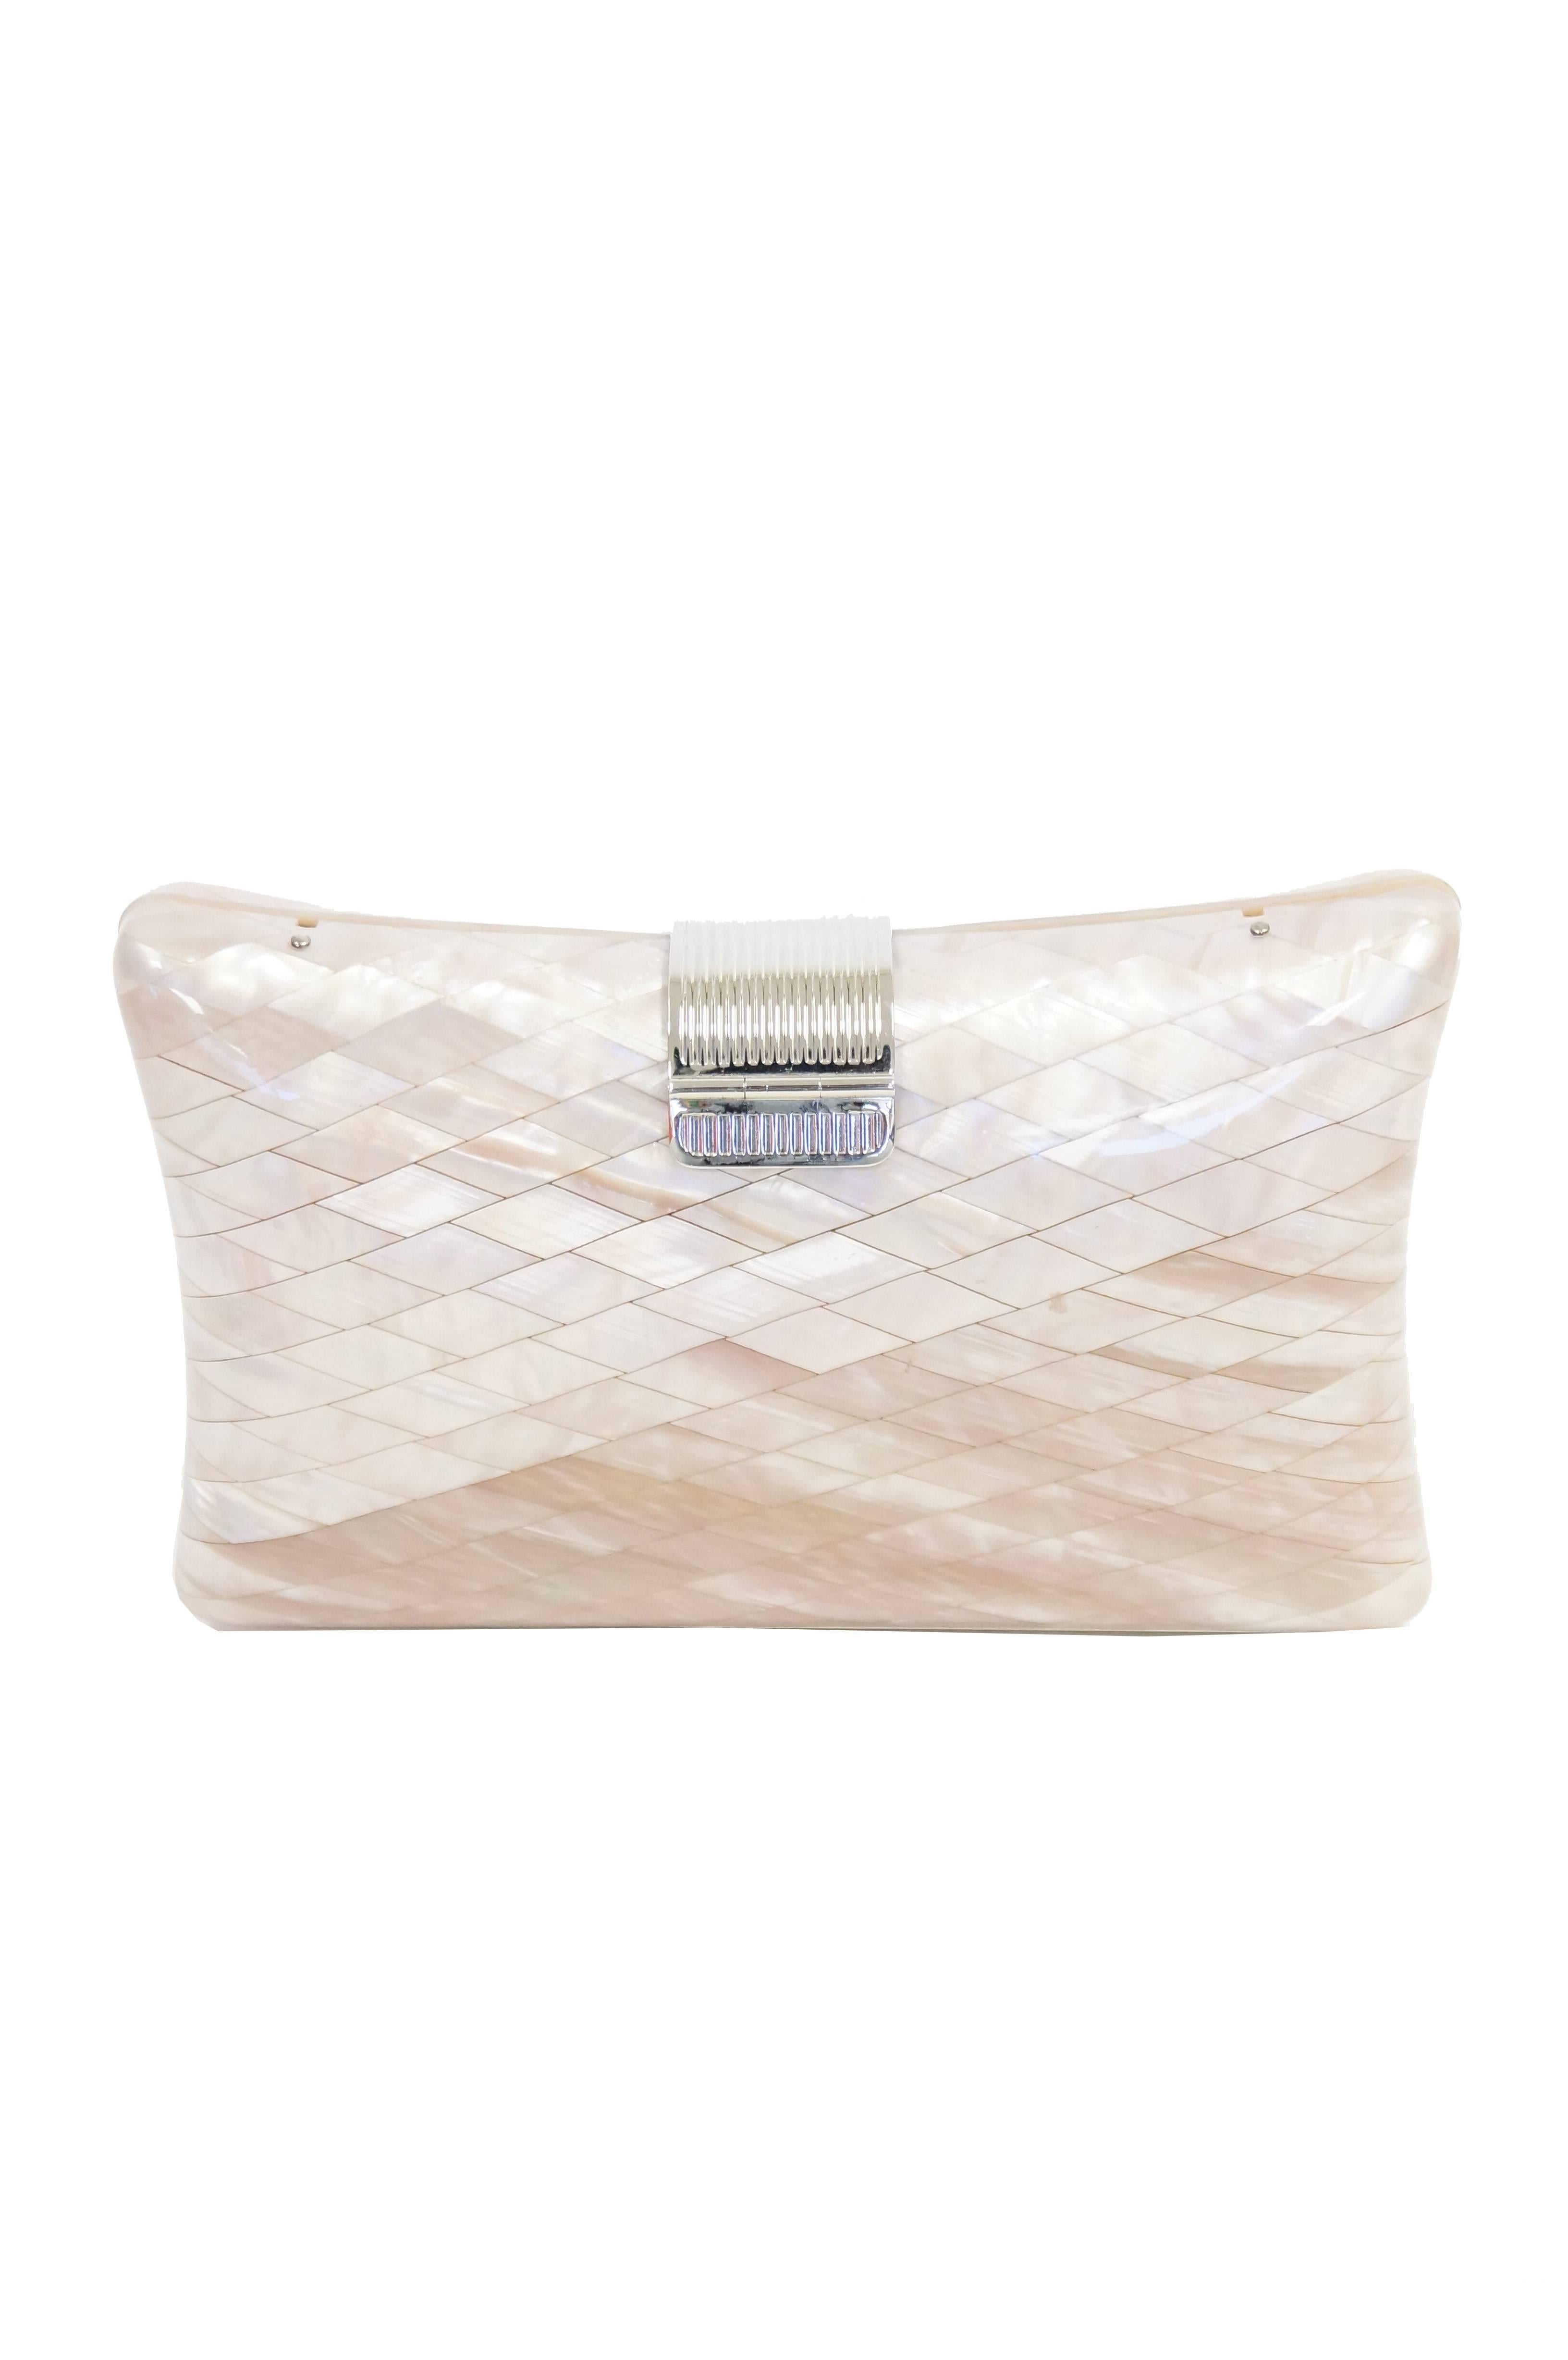 Beige 1950s Lisette Mother of Pearl and Lucite Clutch Made in Italy 